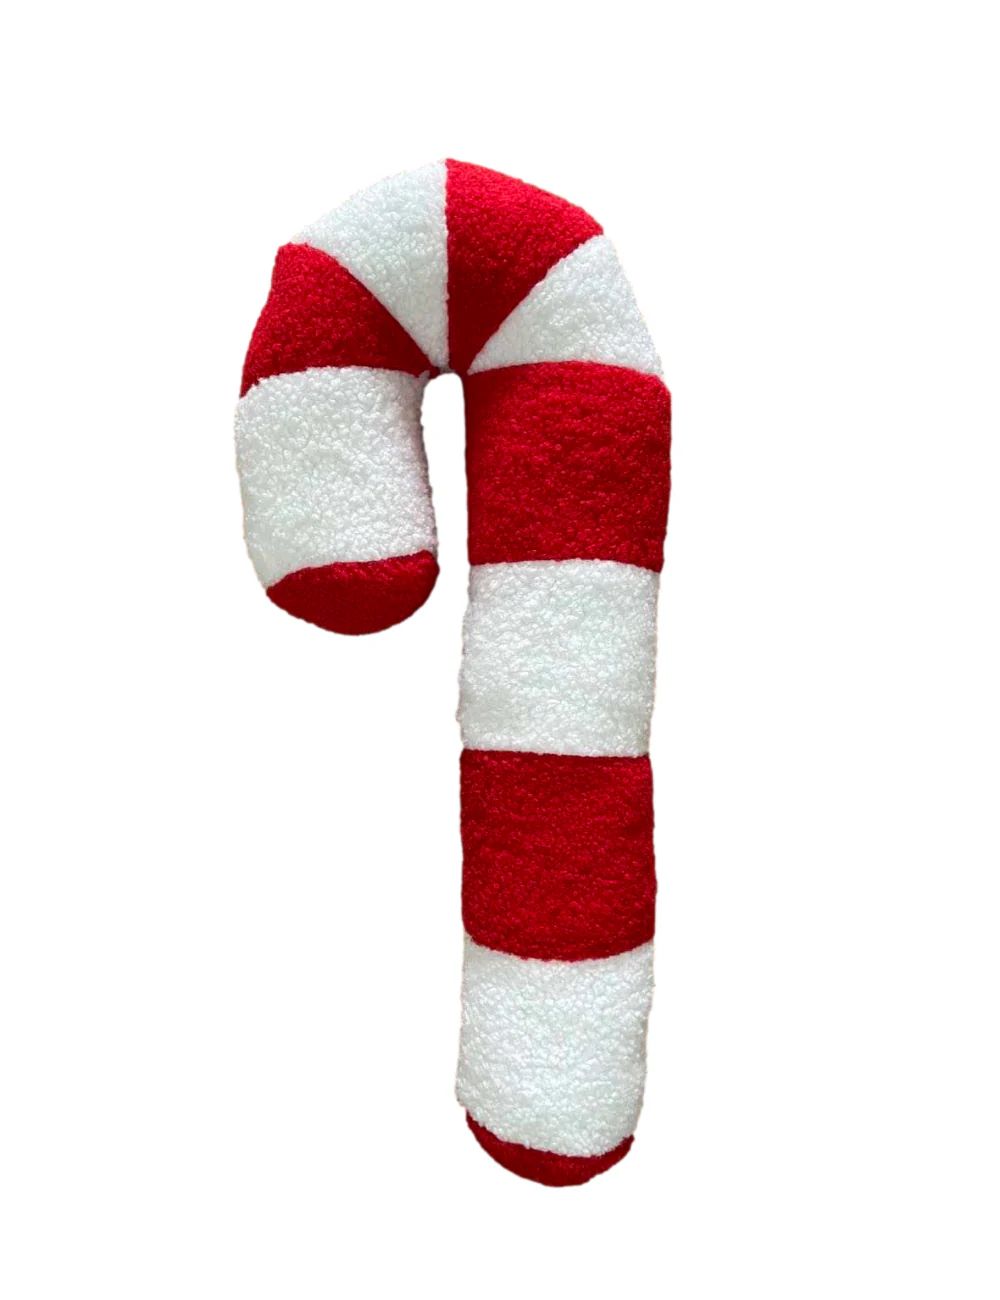 TSC x Madi Nelson: 3D Candy Cane Pillow- Sold out | The Styled Collection